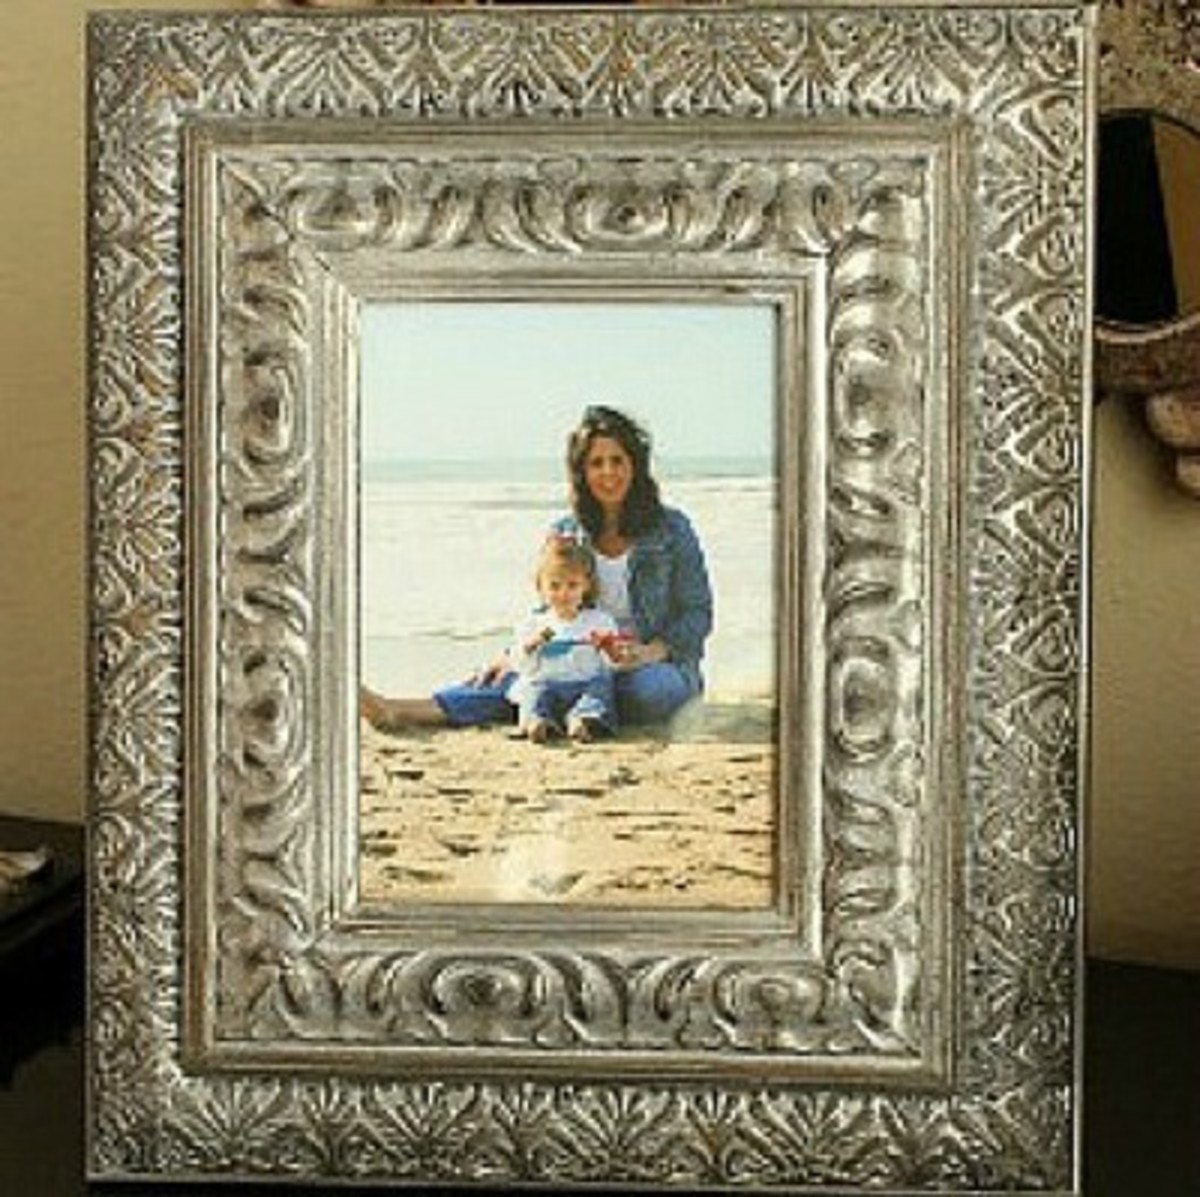 how-to-use-old-picture-frames